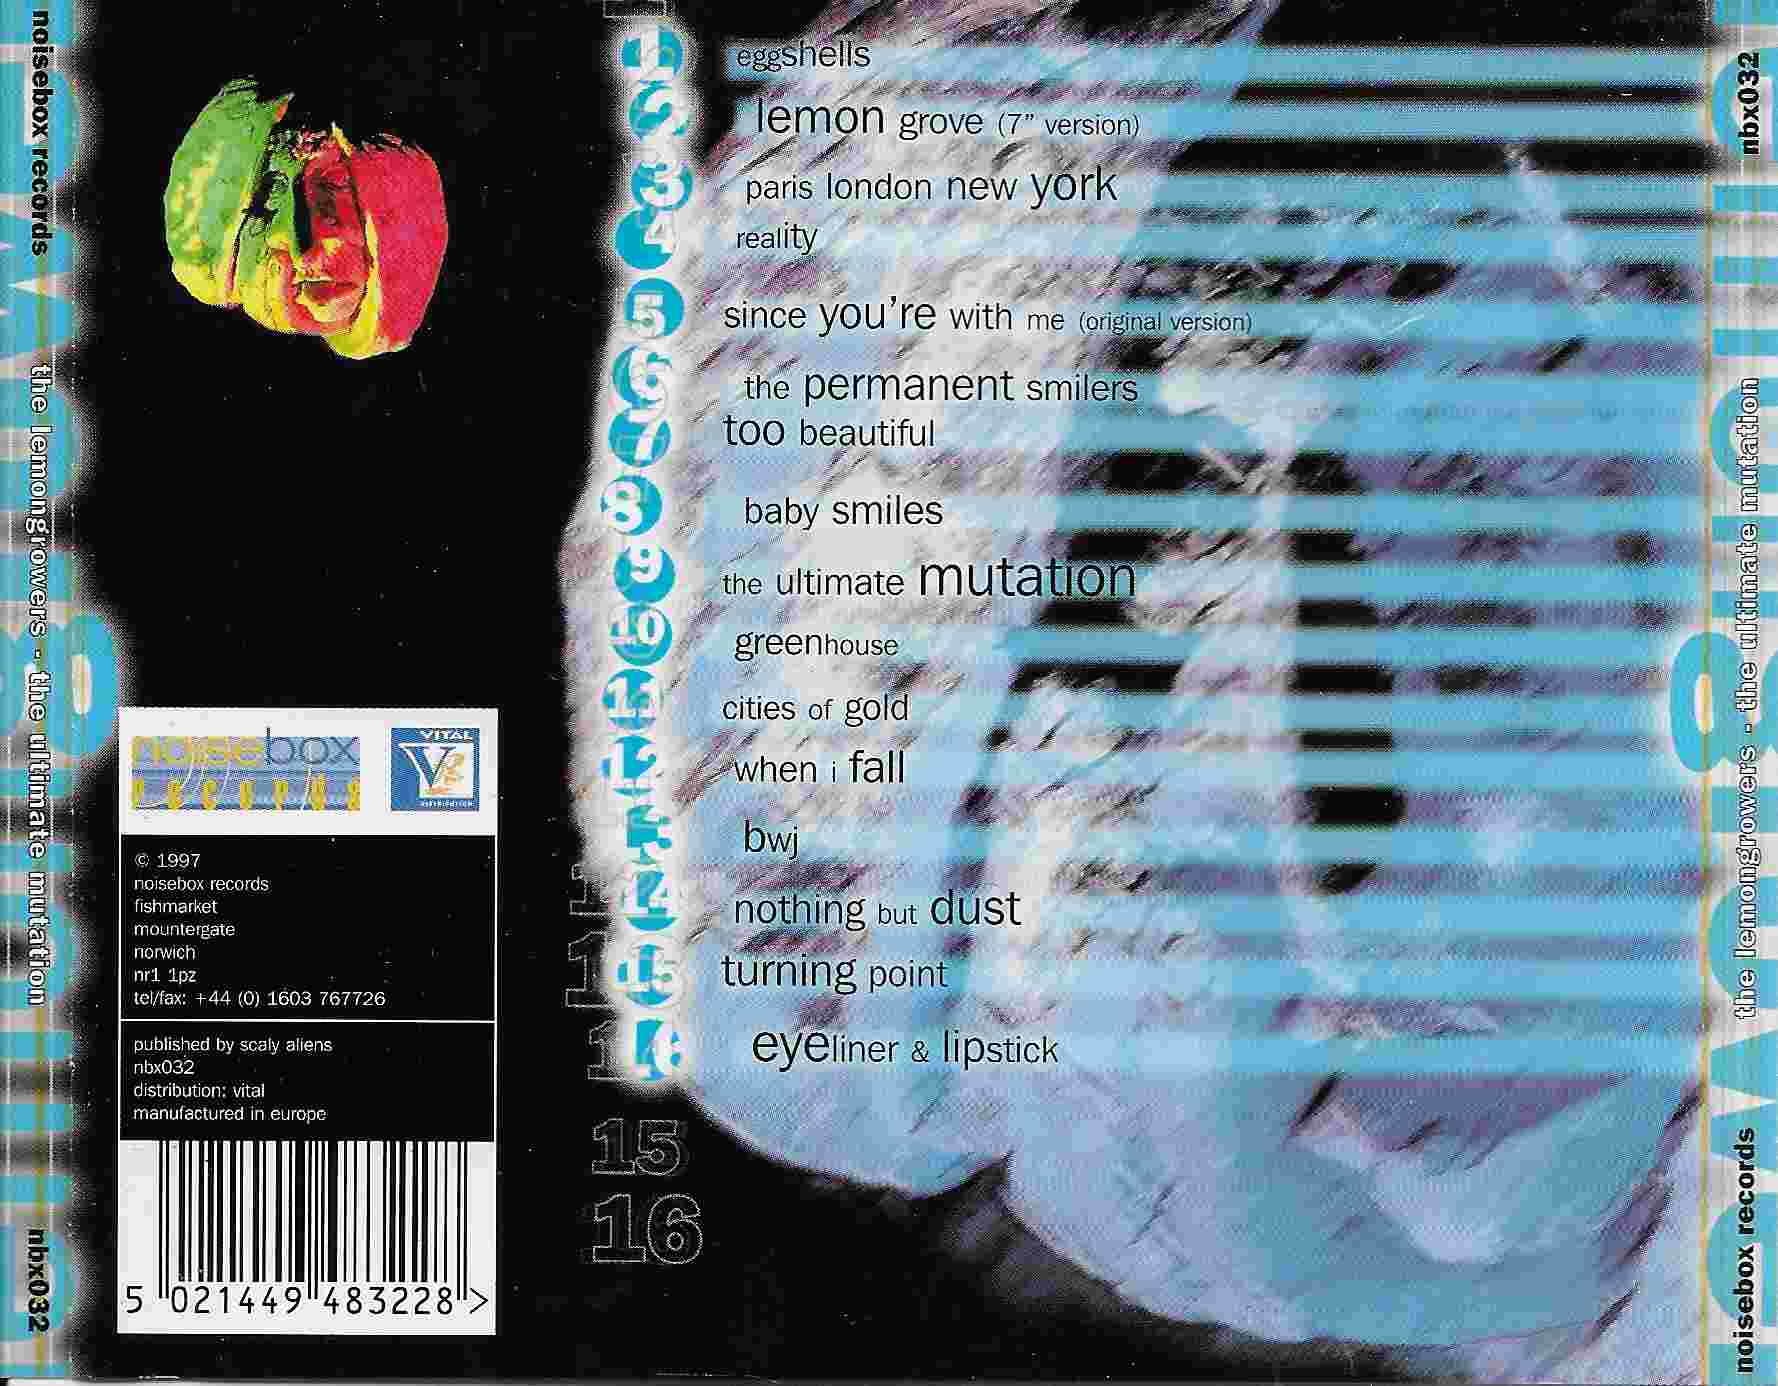 Back cover of NBX 032